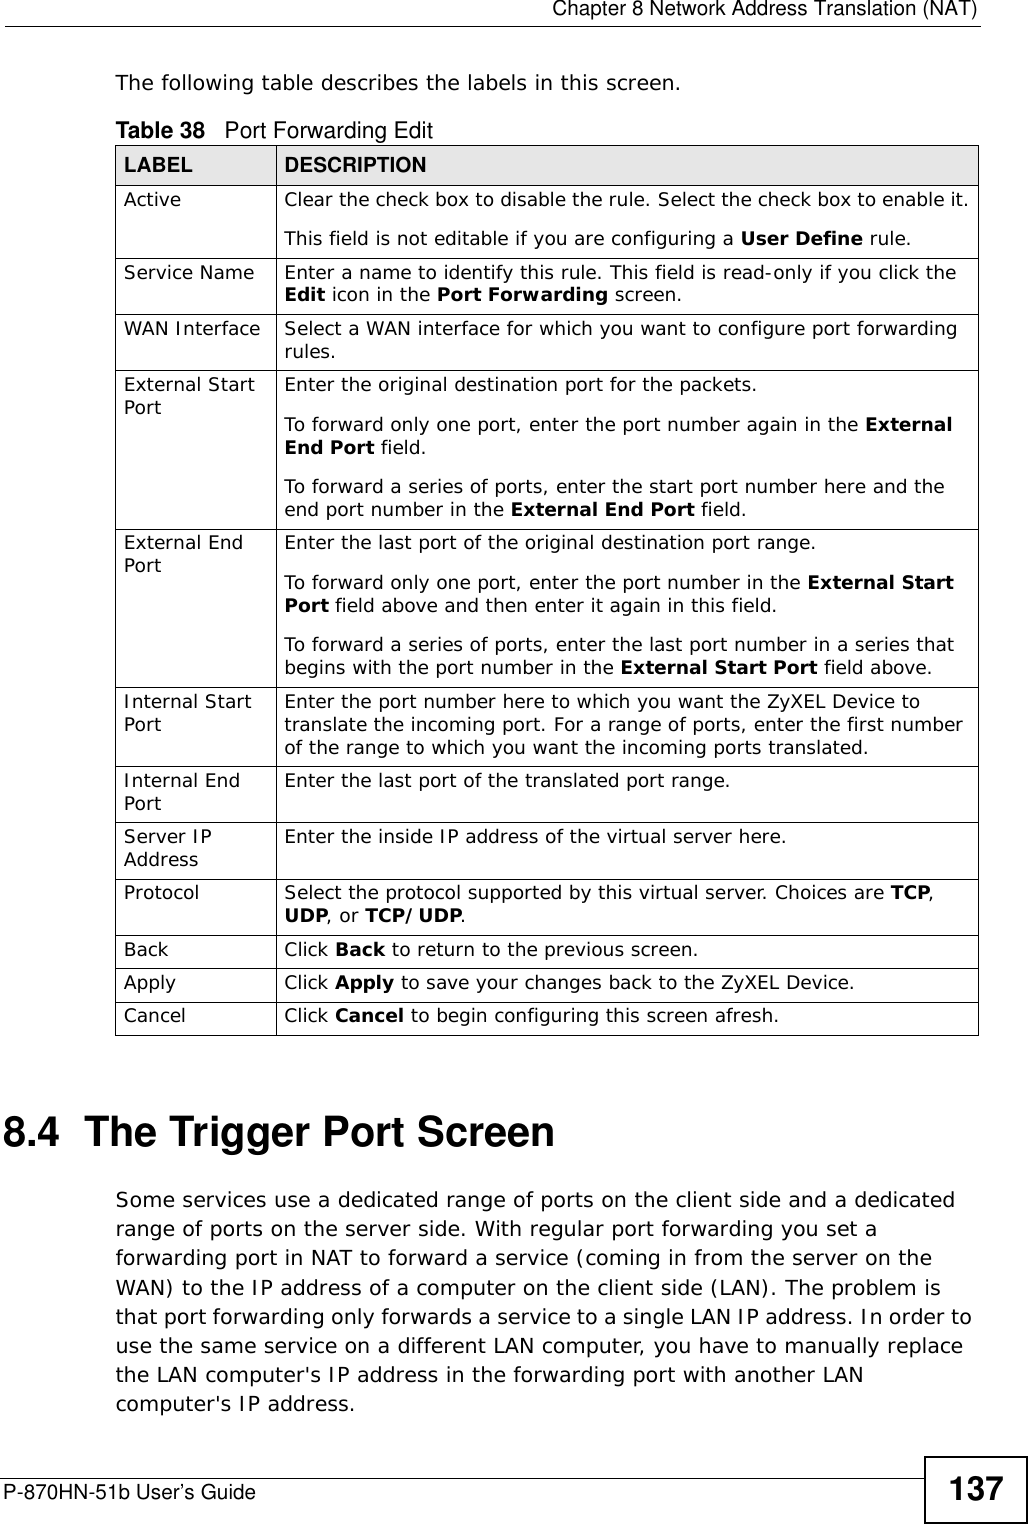  Chapter 8 Network Address Translation (NAT)P-870HN-51b User’s Guide 137The following table describes the labels in this screen. 8.4  The Trigger Port ScreenSome services use a dedicated range of ports on the client side and a dedicated range of ports on the server side. With regular port forwarding you set a forwarding port in NAT to forward a service (coming in from the server on the WAN) to the IP address of a computer on the client side (LAN). The problem is that port forwarding only forwards a service to a single LAN IP address. In order to use the same service on a different LAN computer, you have to manually replace the LAN computer&apos;s IP address in the forwarding port with another LAN computer&apos;s IP address. Table 38   Port Forwarding EditLABEL DESCRIPTIONActive Clear the check box to disable the rule. Select the check box to enable it.This field is not editable if you are configuring a User Define rule.Service Name Enter a name to identify this rule. This field is read-only if you click the Edit icon in the Port Forwarding screen.WAN Interface Select a WAN interface for which you want to configure port forwarding rules.External Start Port Enter the original destination port for the packets.To forward only one port, enter the port number again in the External End Port field. To forward a series of ports, enter the start port number here and the end port number in the External End Port field.External End Port  Enter the last port of the original destination port range. To forward only one port, enter the port number in the External Start Port field above and then enter it again in this field. To forward a series of ports, enter the last port number in a series that begins with the port number in the External Start Port field above.Internal Start Port Enter the port number here to which you want the ZyXEL Device to translate the incoming port. For a range of ports, enter the first number of the range to which you want the incoming ports translated.Internal End Port  Enter the last port of the translated port range.Server IP Address Enter the inside IP address of the virtual server here.Protocol Select the protocol supported by this virtual server. Choices are TCP, UDP, or TCP/UDP.Back Click Back to return to the previous screen.Apply Click Apply to save your changes back to the ZyXEL Device.Cancel Click Cancel to begin configuring this screen afresh.